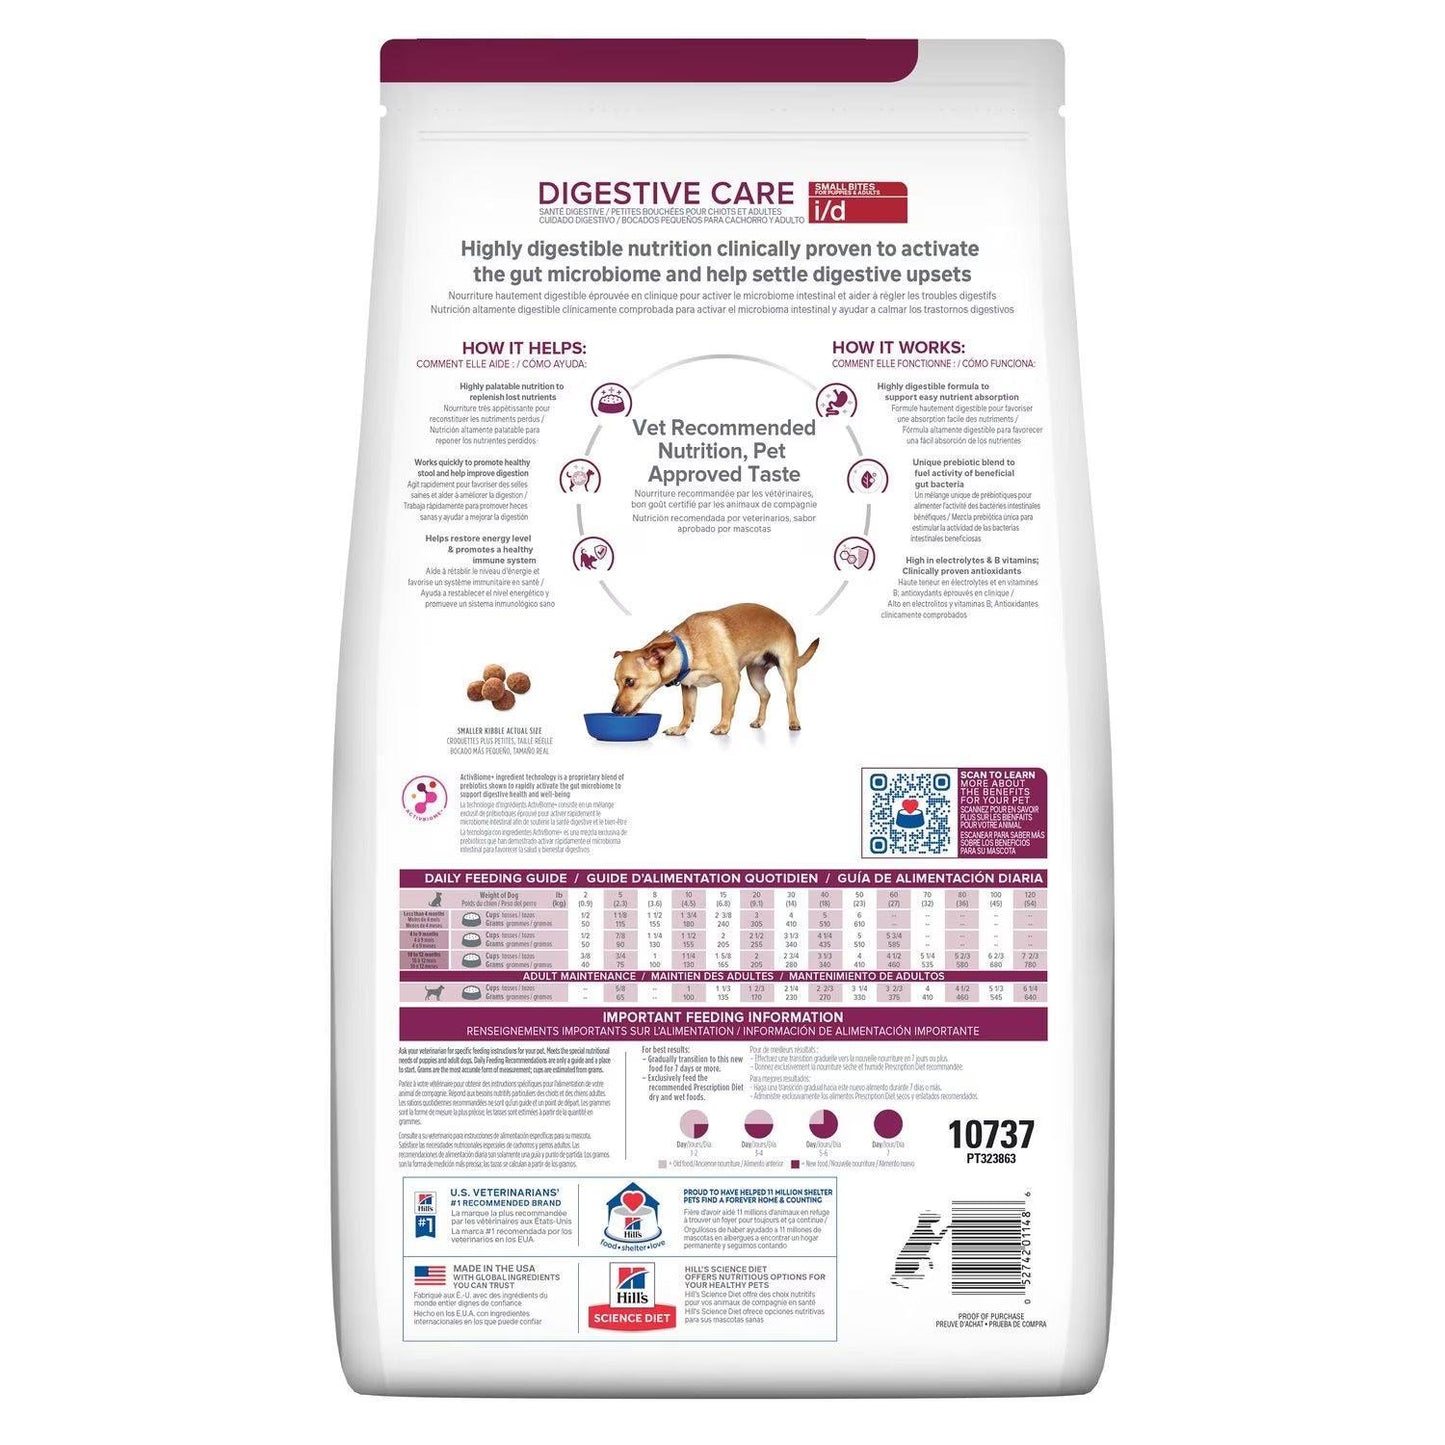 Hill's - Perros I/D Small Bite Digestive Care